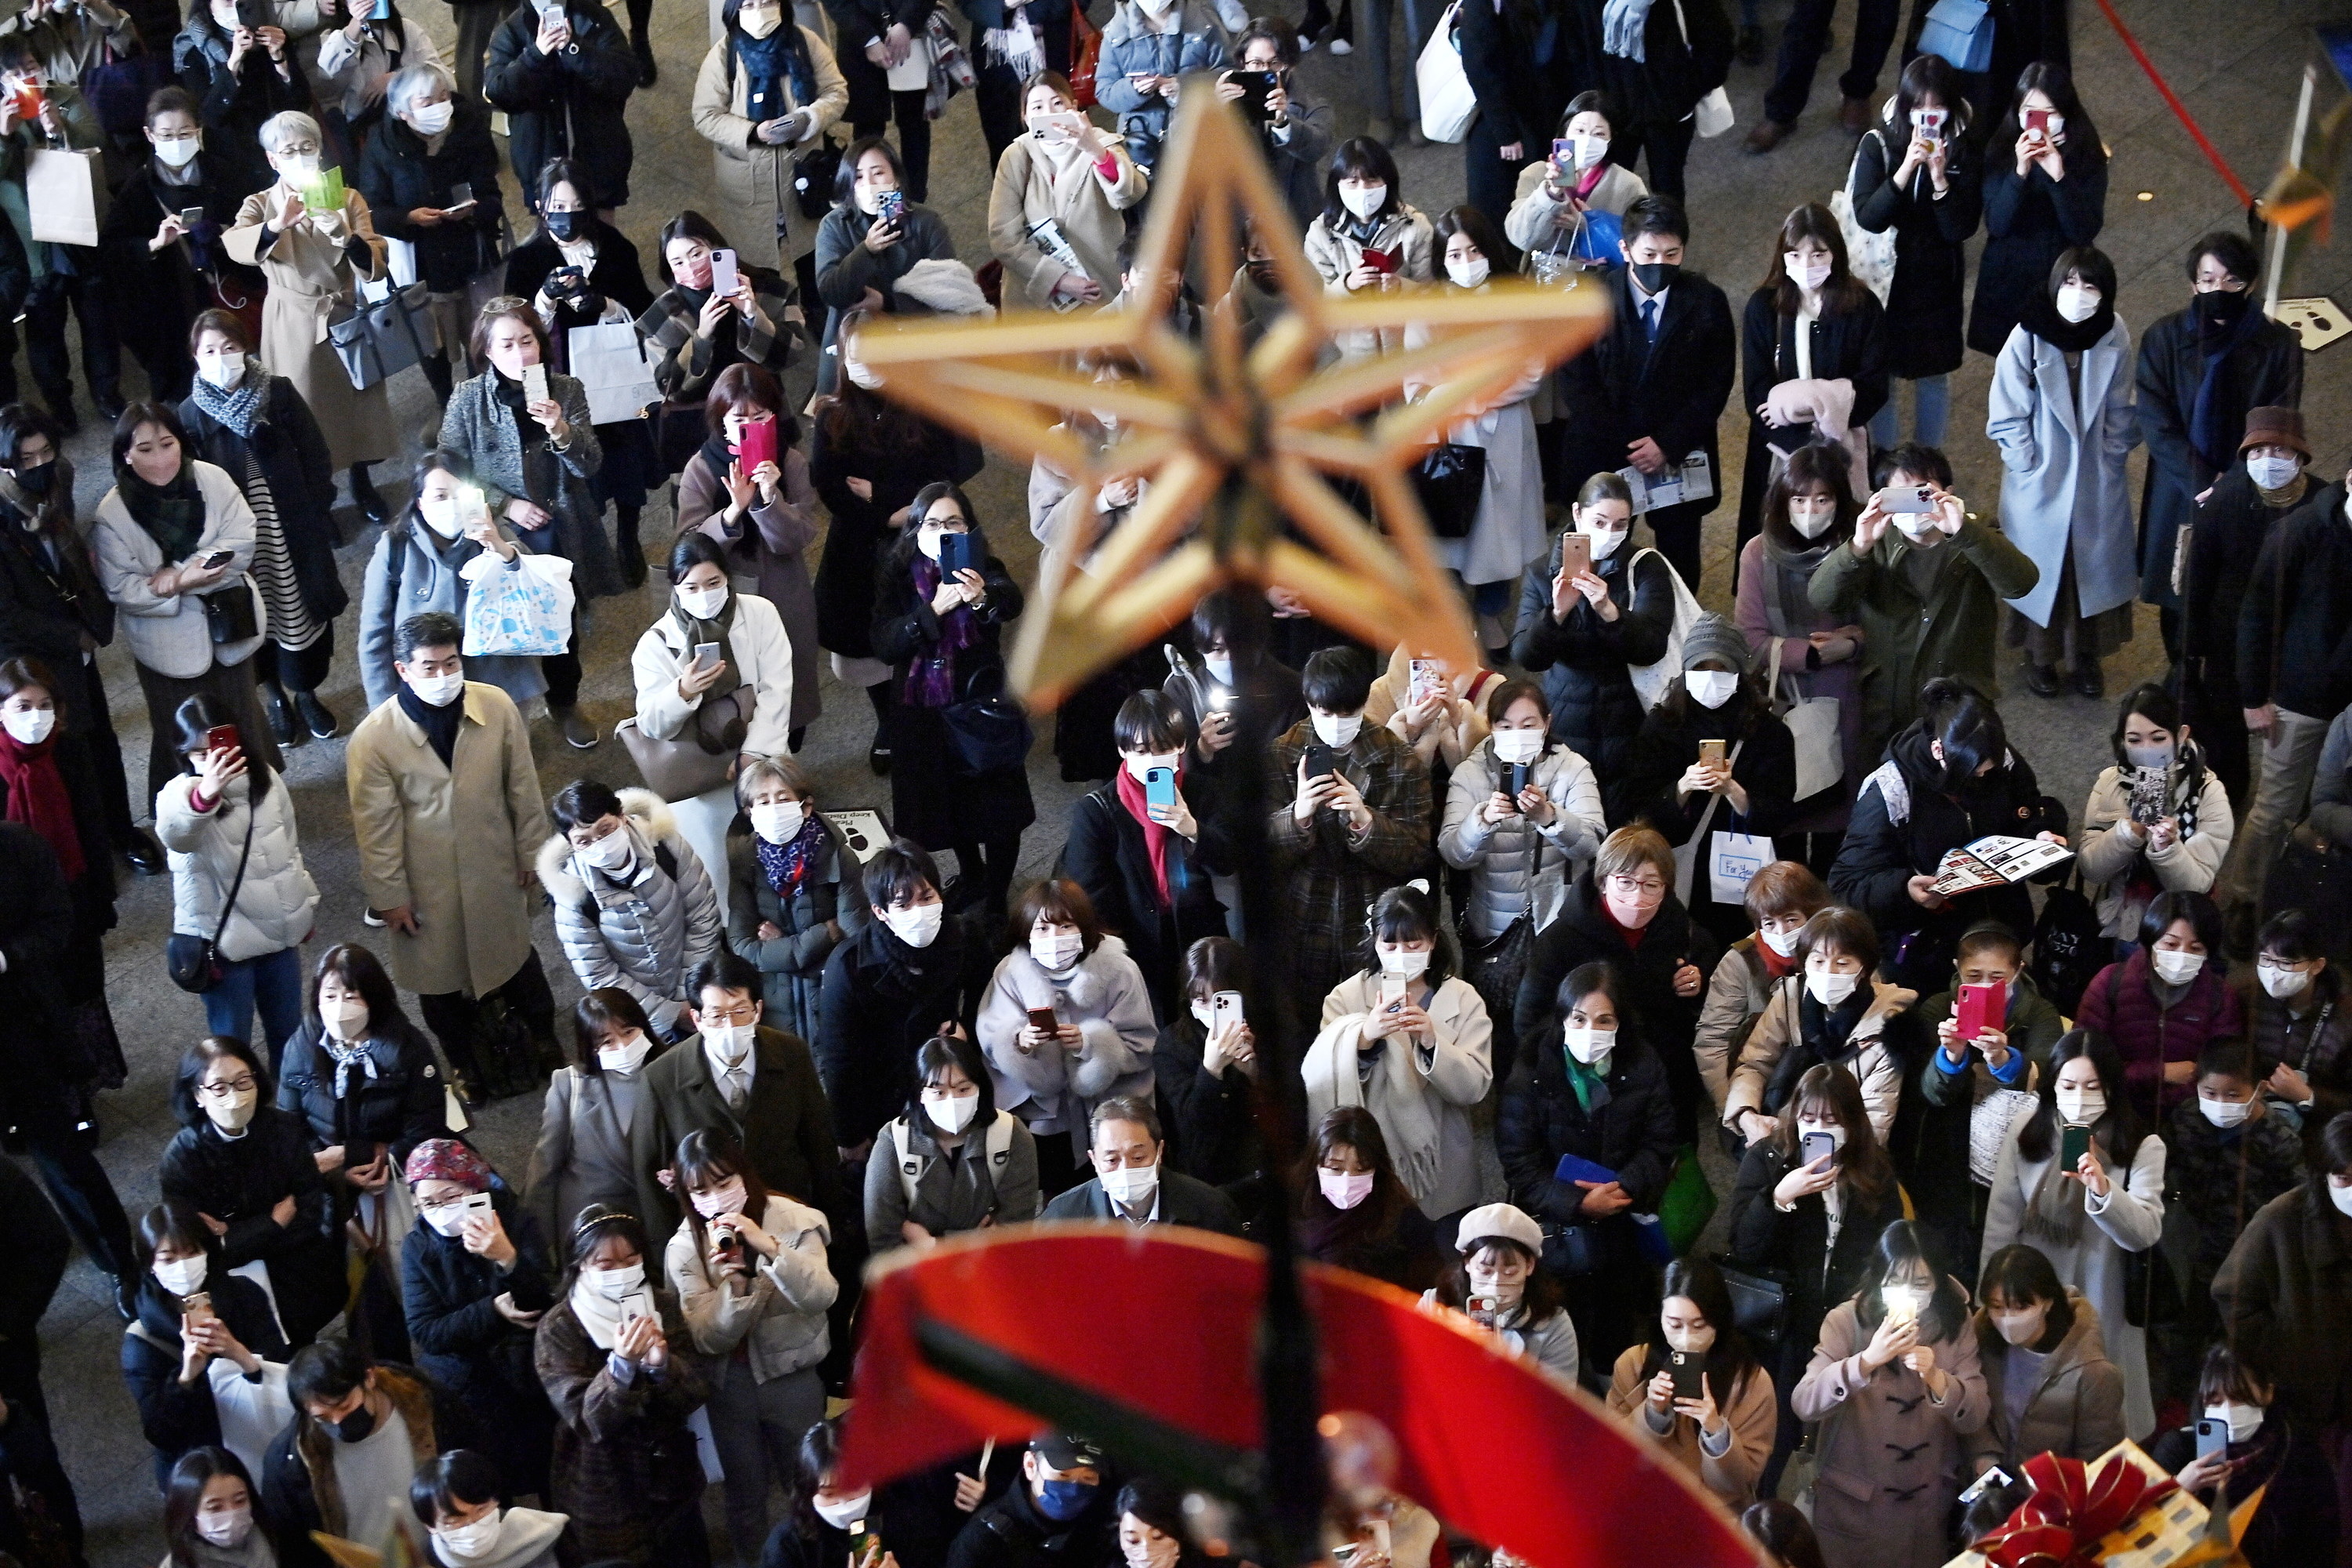 People wearing masks during a holiday festival